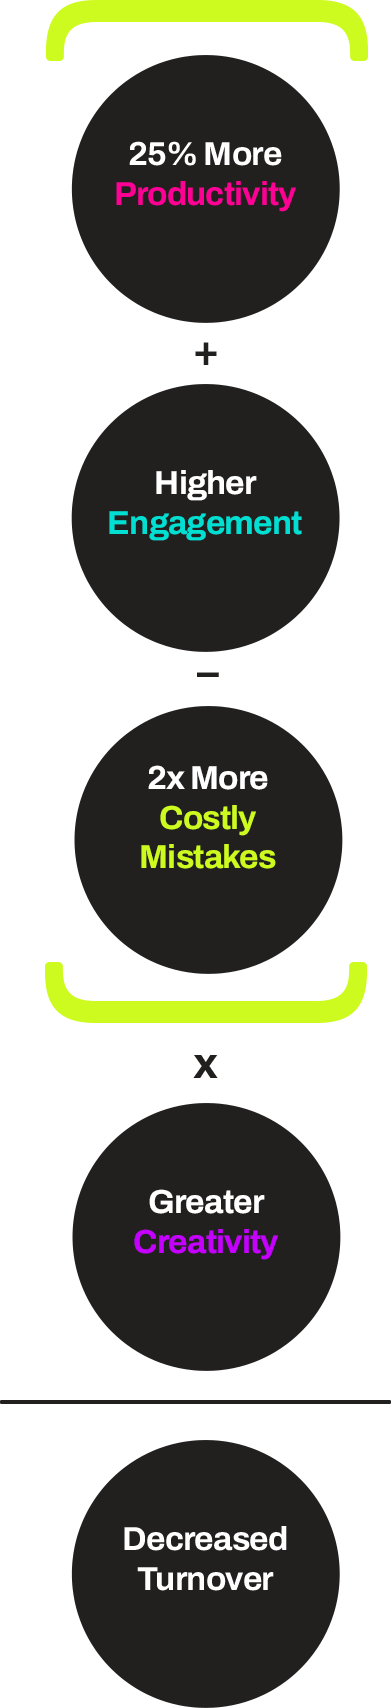 25% More Productivity + Higher Engagement3 - 2x Costly Mistakes) * Greater Creativity / Decreased Turnover